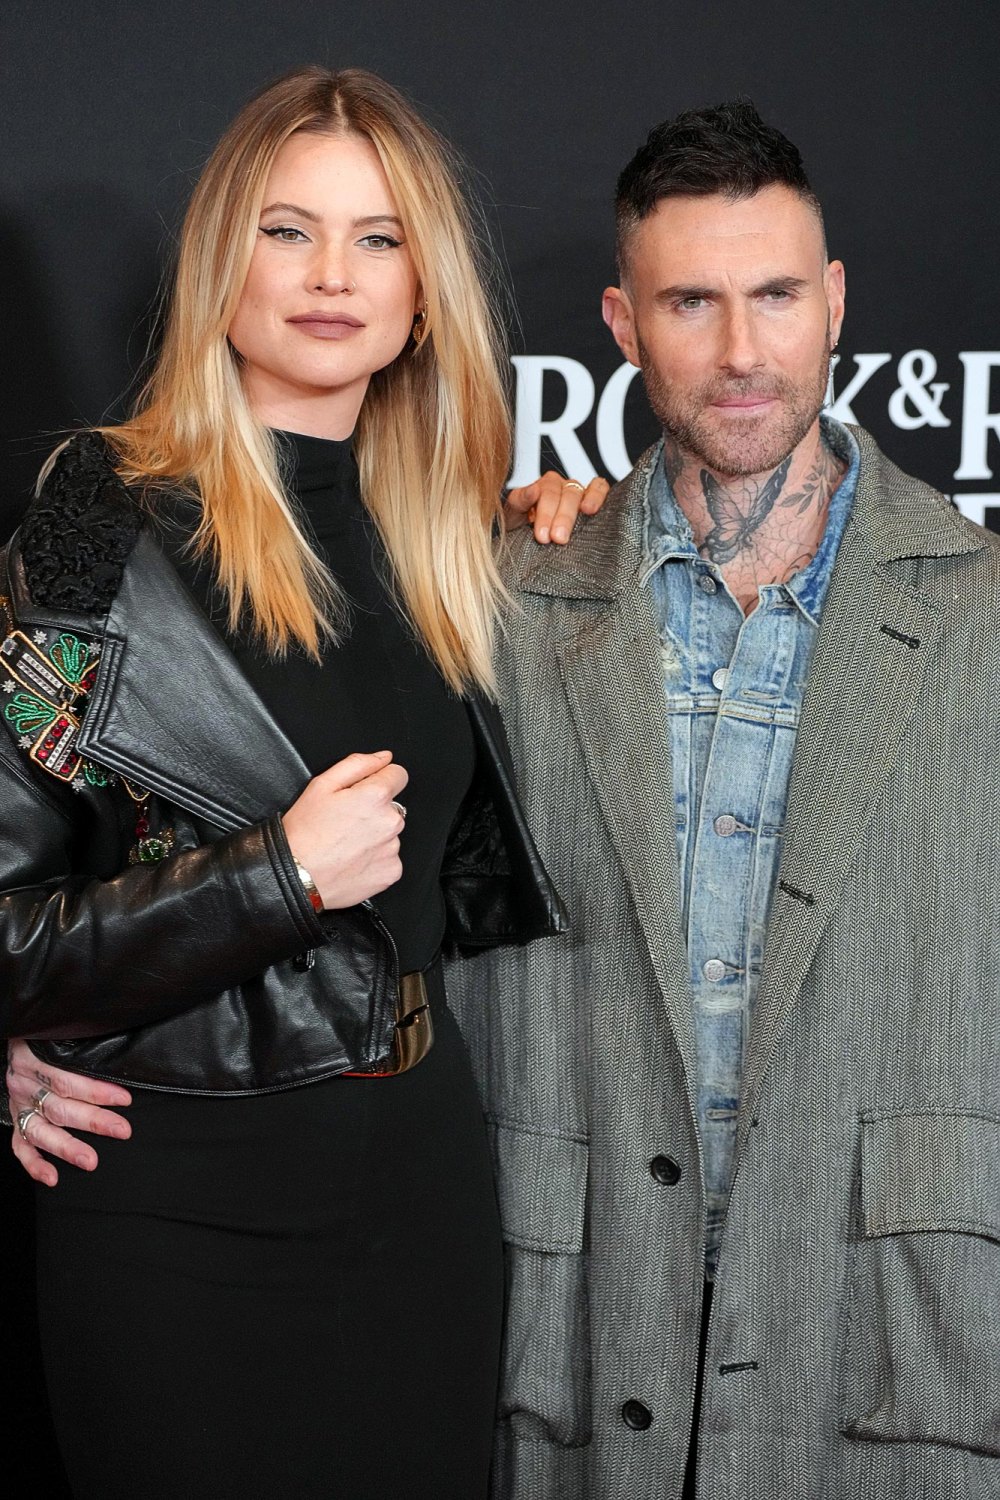 Behati Prinsloo and Adam Levine Make Rare Red Carpet Appearance at Rock and Roll Hall of Fame Show 210